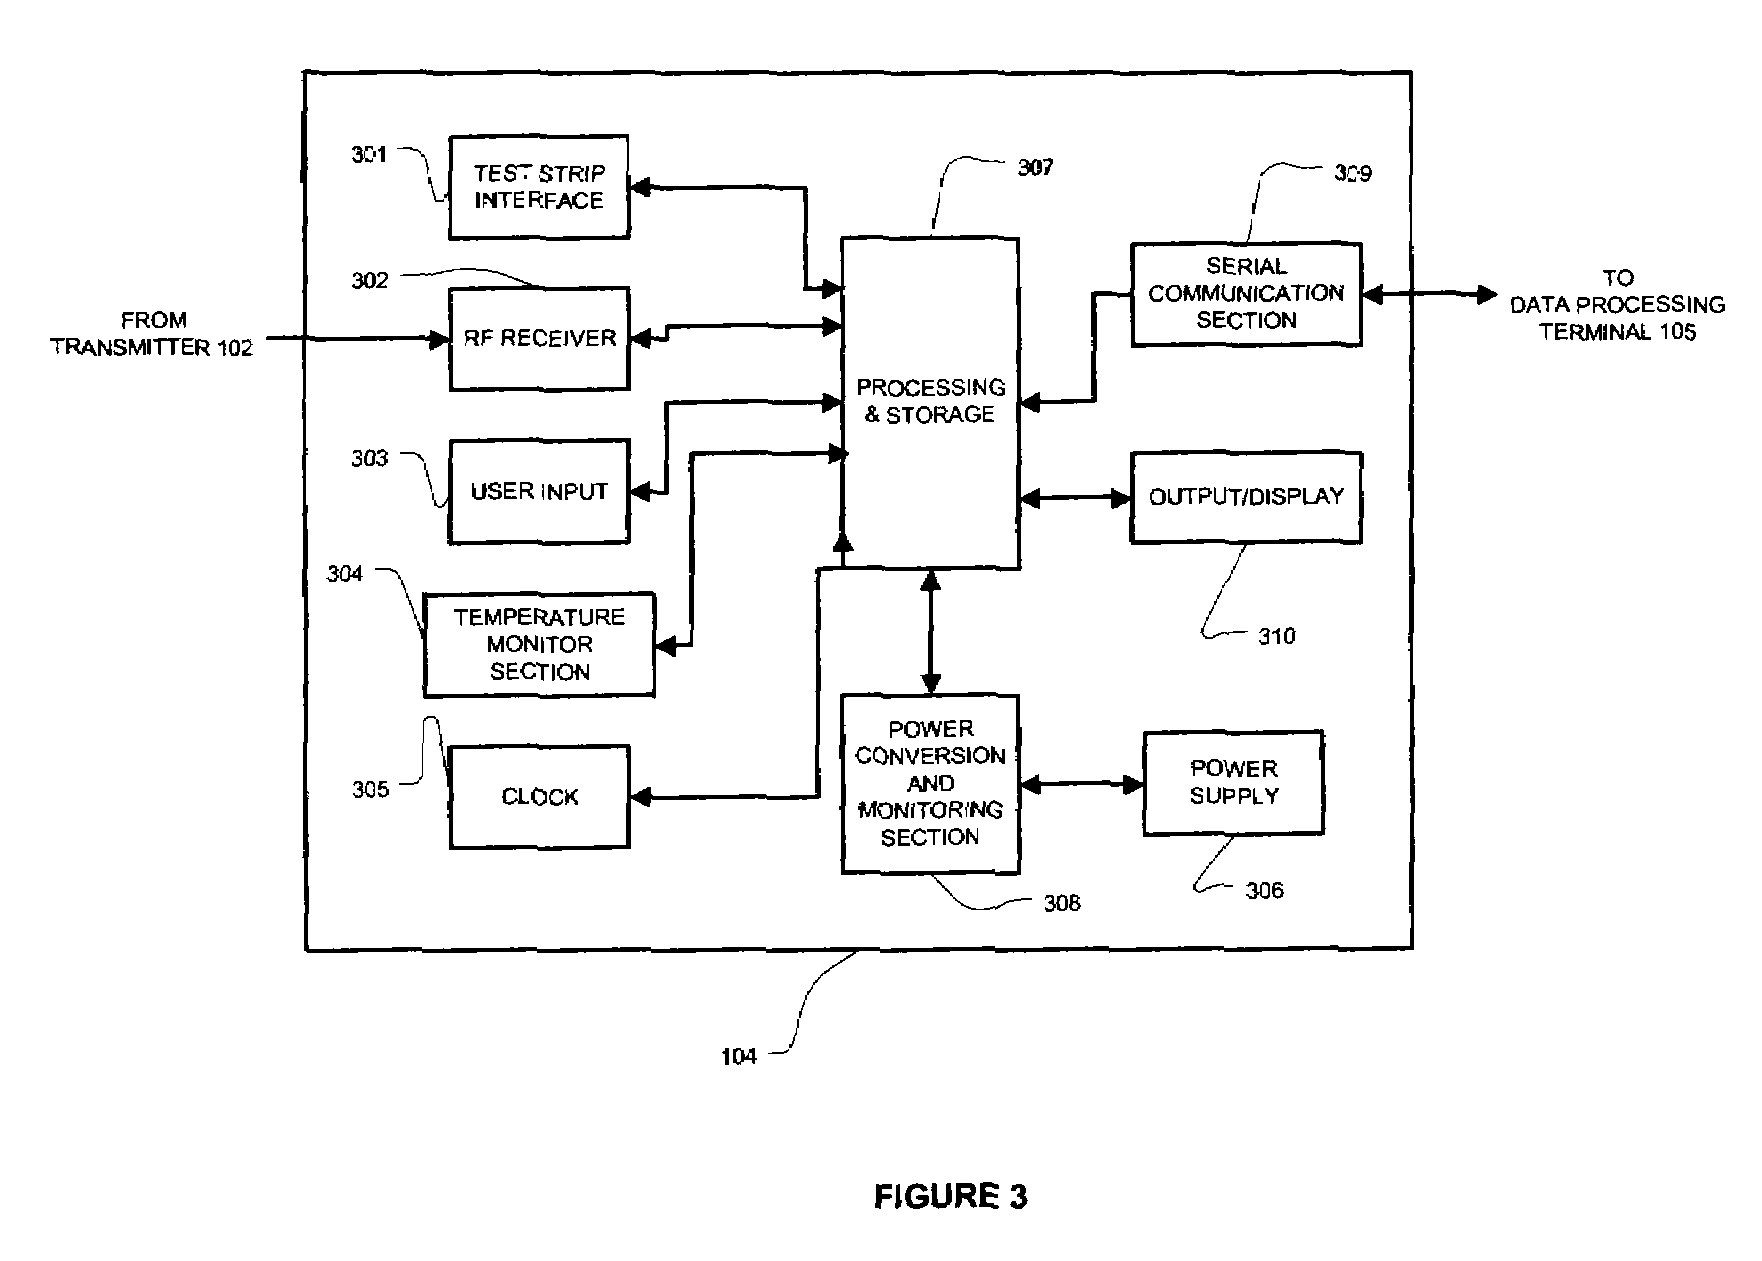 Method and system for providing calibration of an analyte sensor in an analyte monitoring system